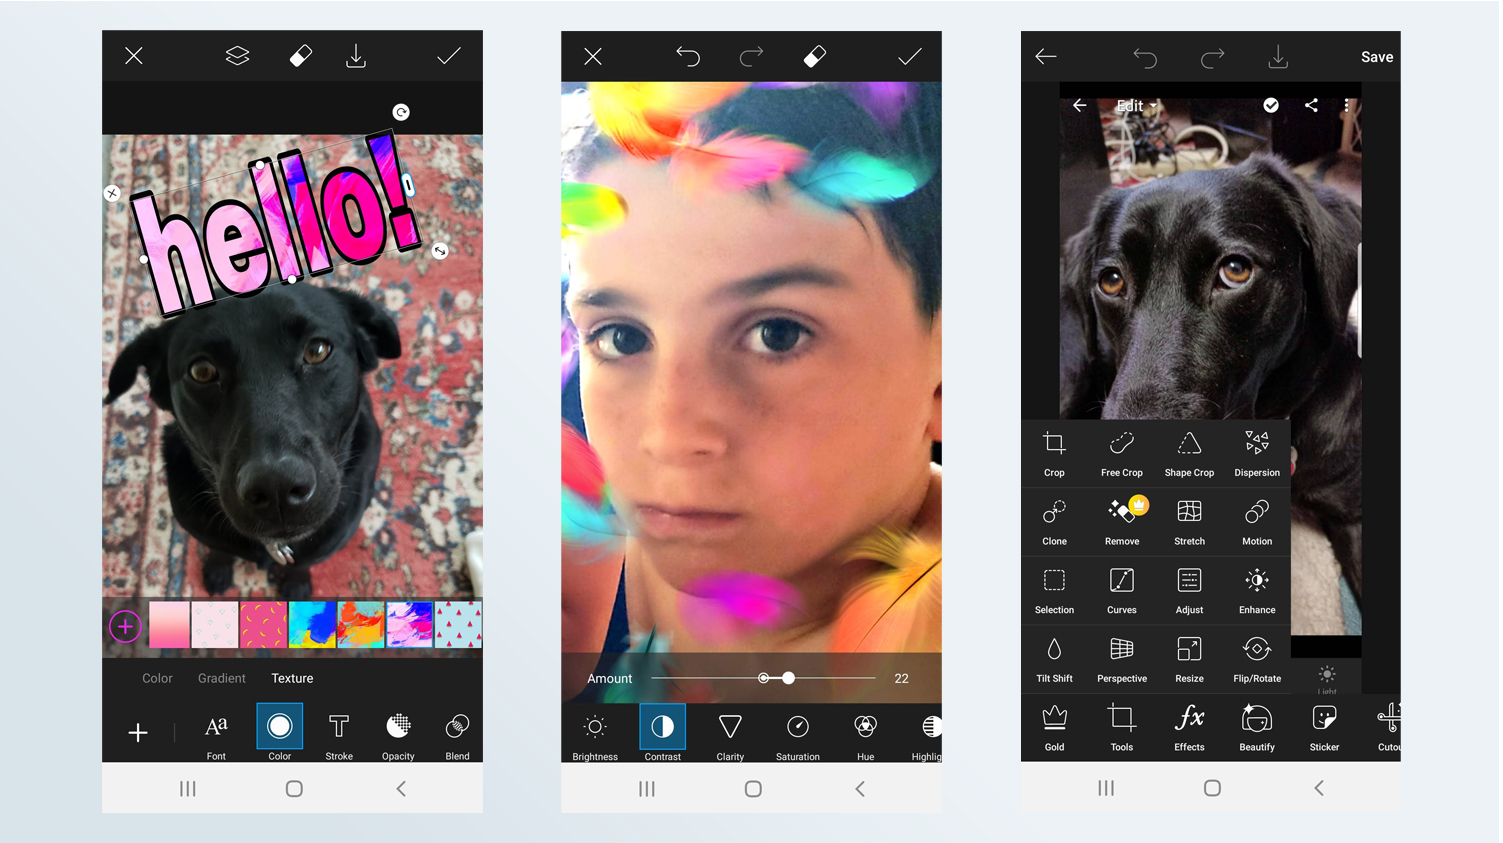 Screens from PicsArt, our choice as the best photo editing app